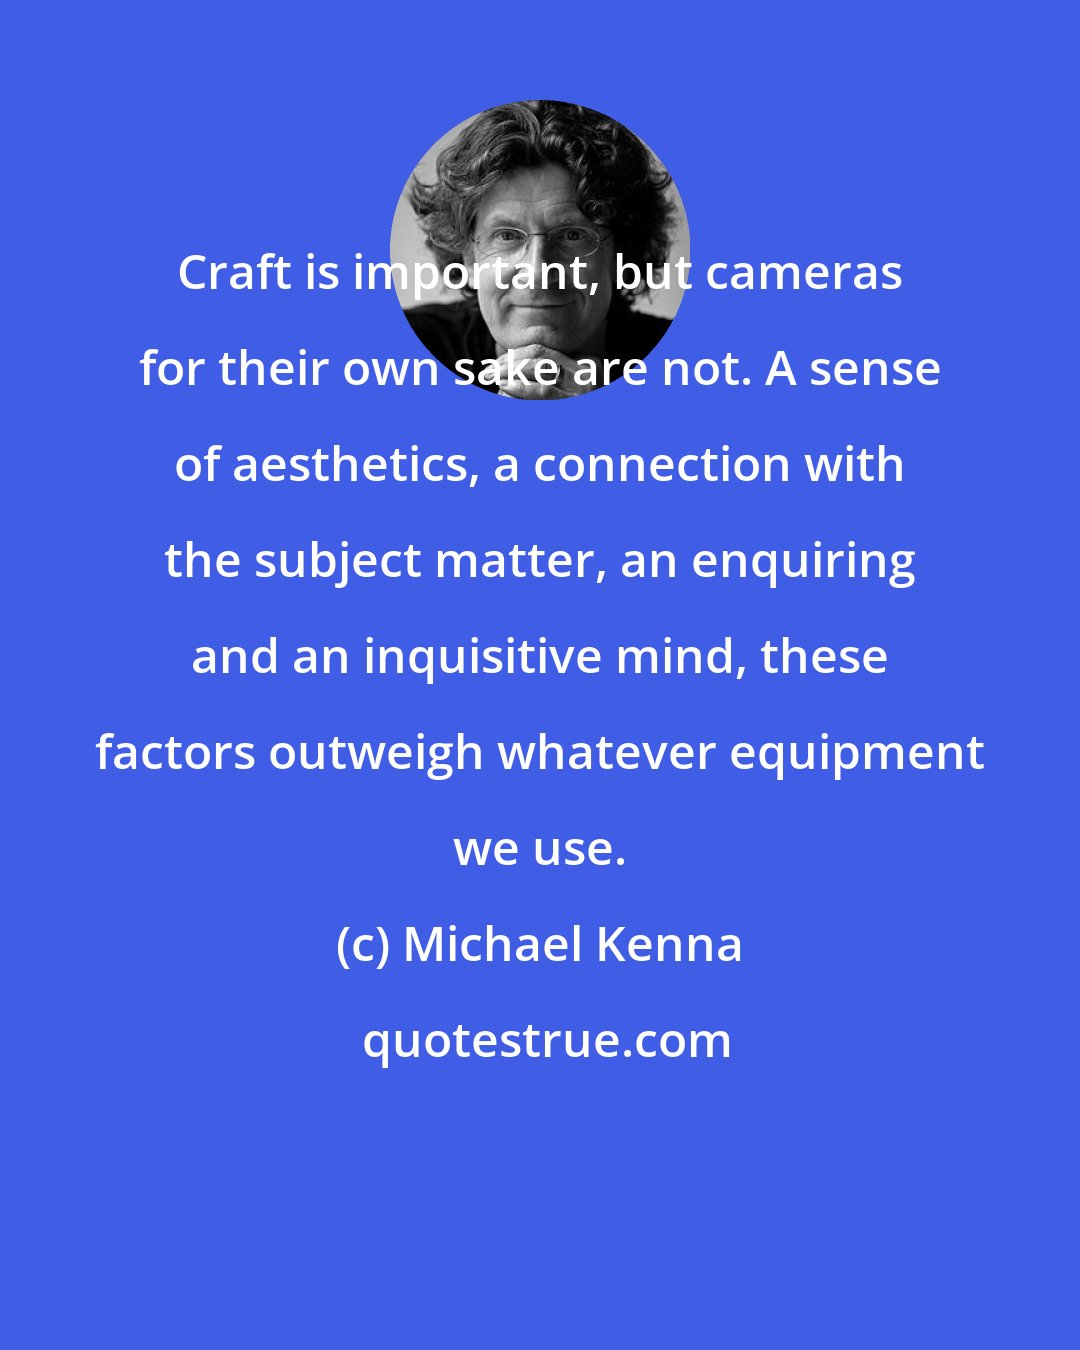 Michael Kenna: Craft is important, but cameras for their own sake are not. A sense of aesthetics, a connection with the subject matter, an enquiring and an inquisitive mind, these factors outweigh whatever equipment we use.